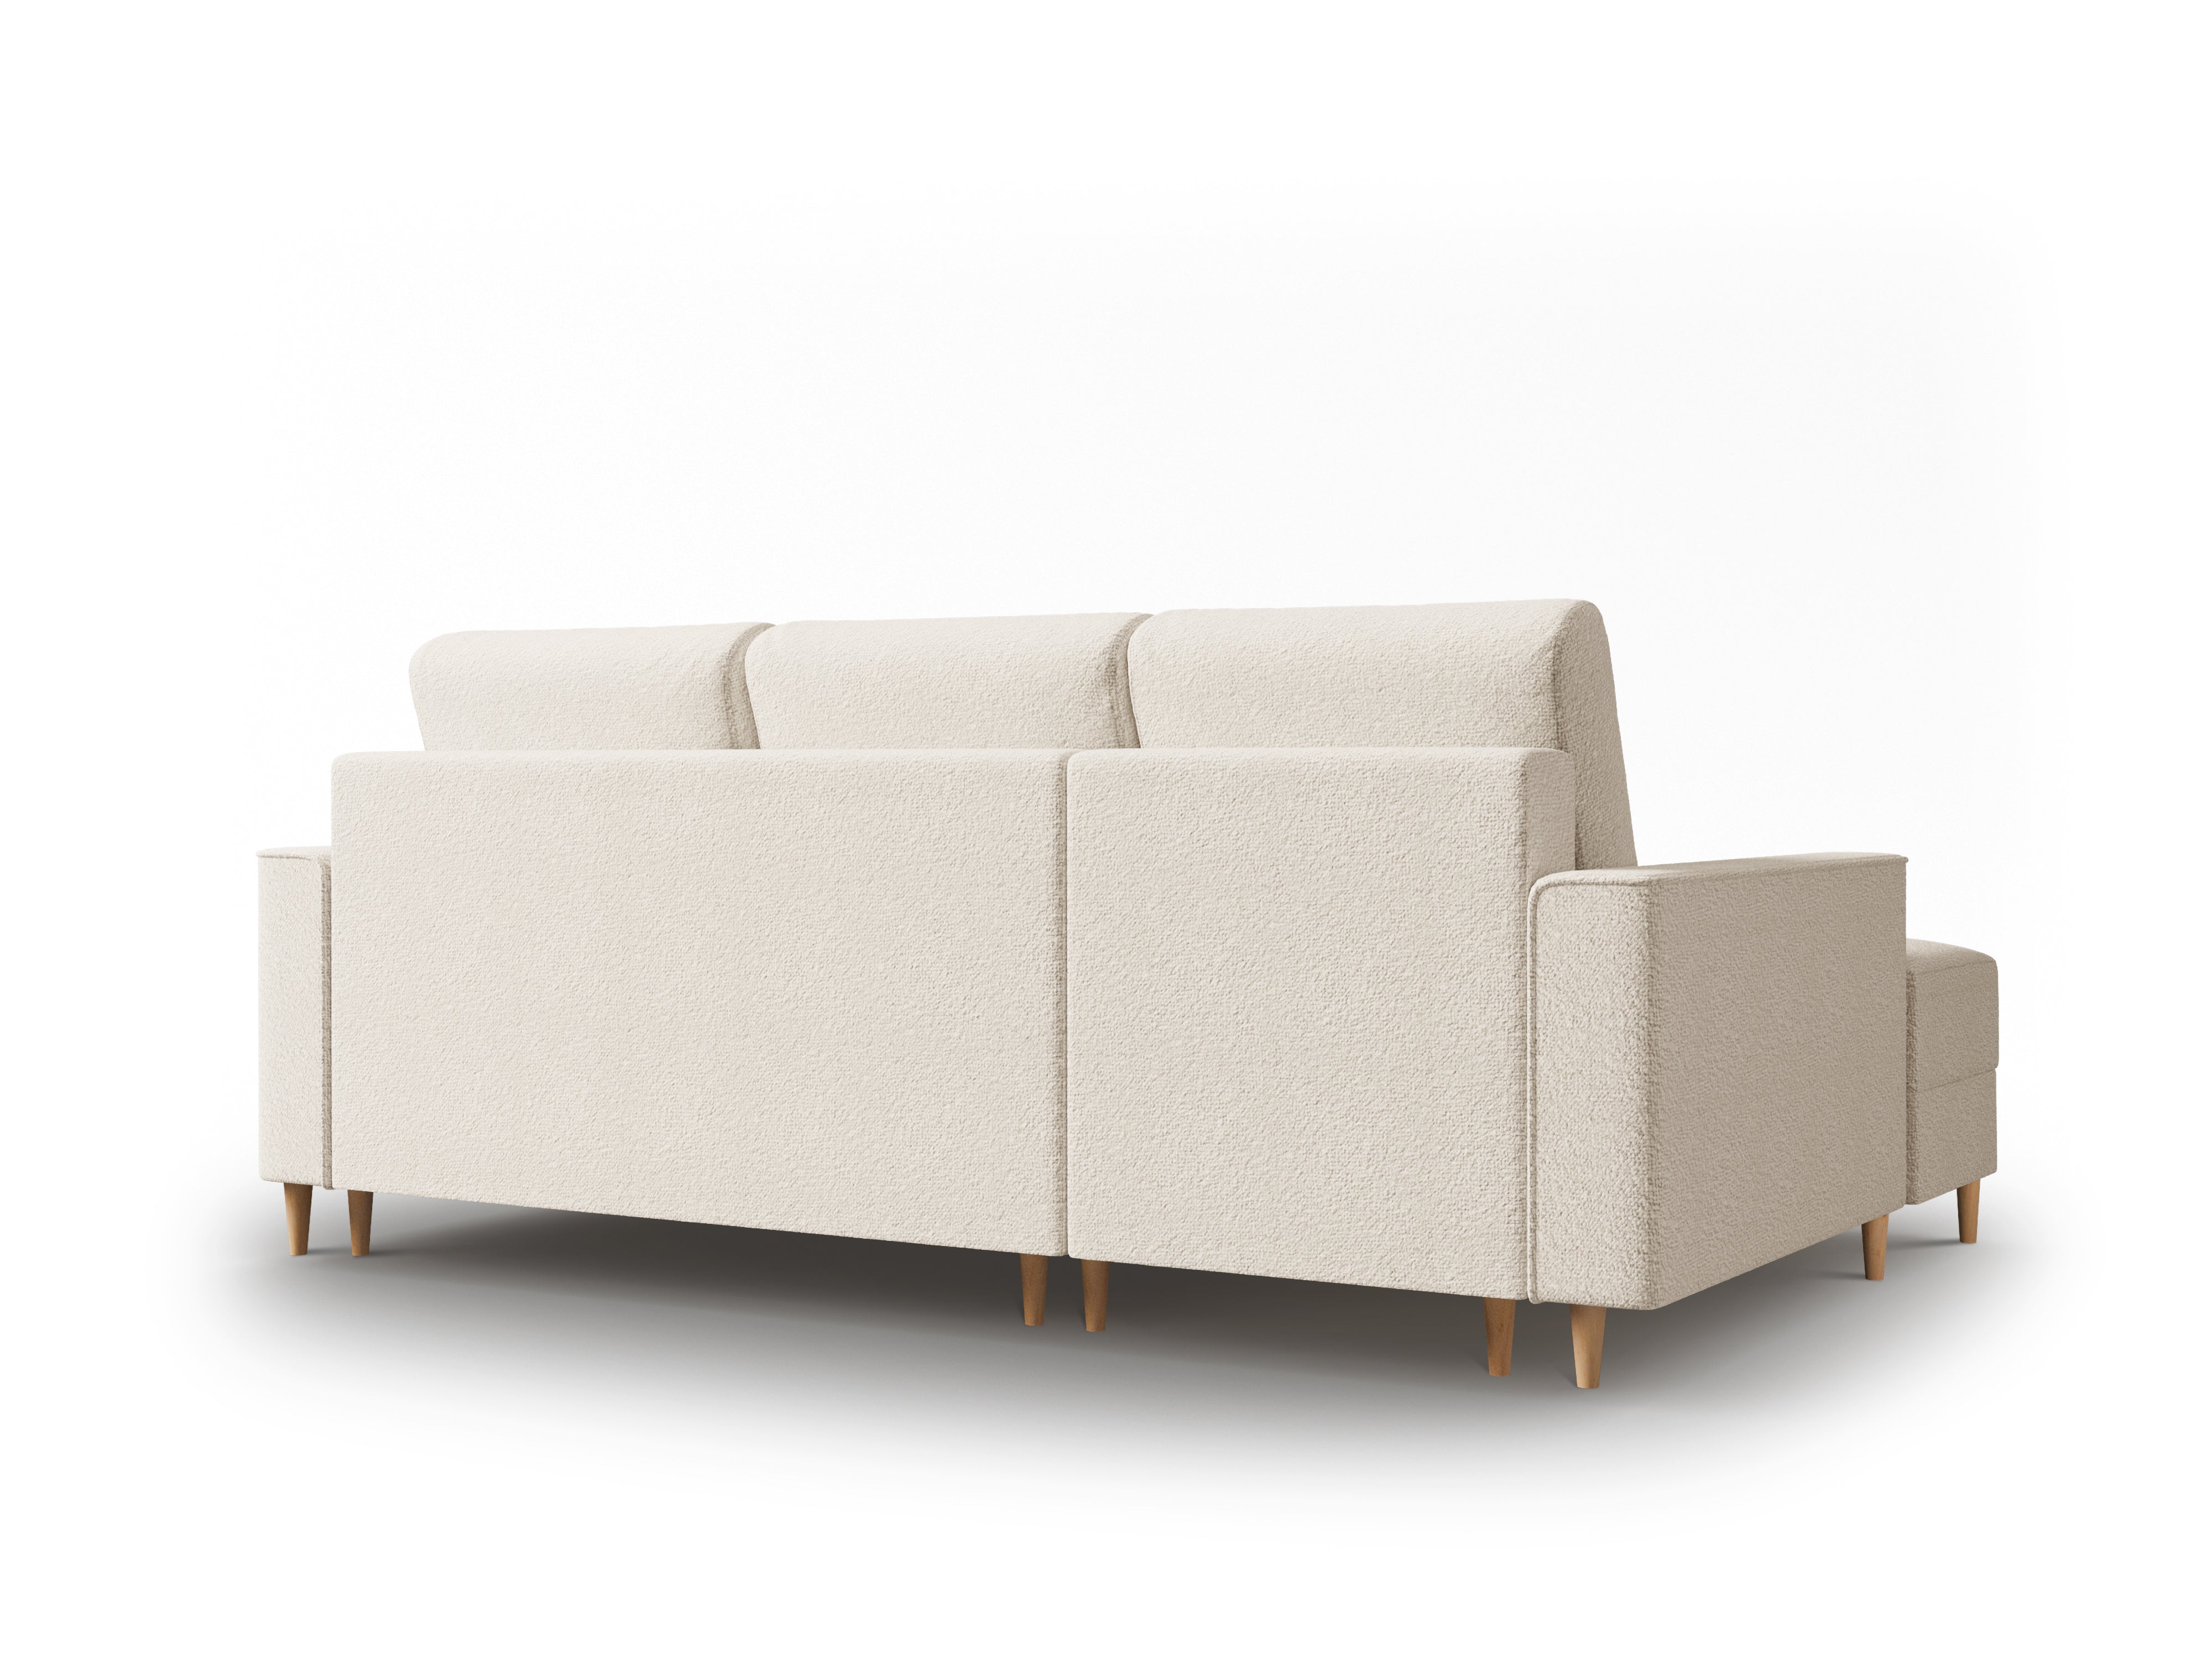 Boucle Left Corner Sofa With Bed Function And Box, "Cartadera", 4 Seats, 225x147x90
Made in Europe, Mazzini Sofas, Eye on Design